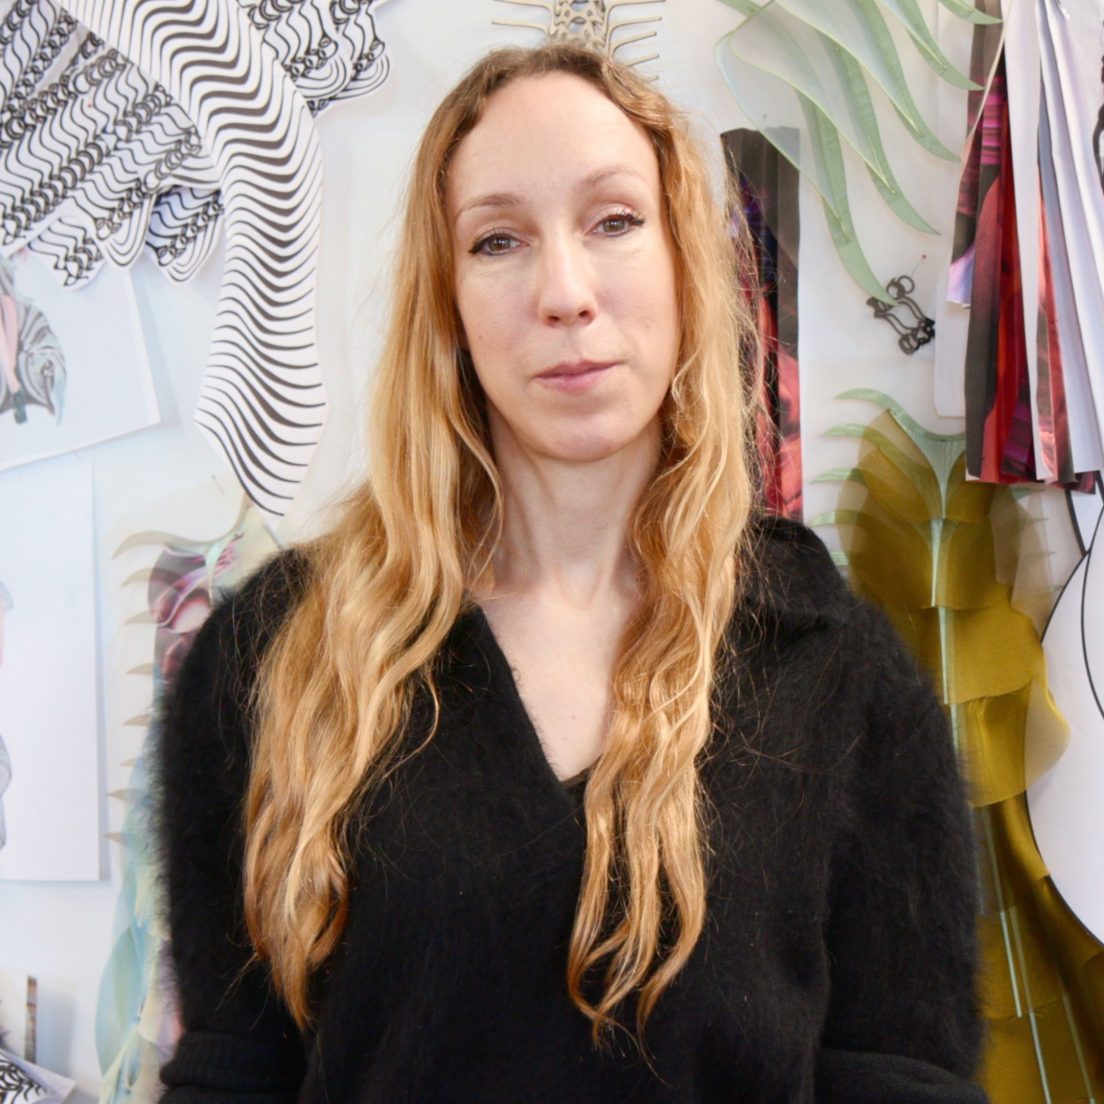 Iris Van Herpen Uses 3d Printing And Magnets For Fashion Collection 